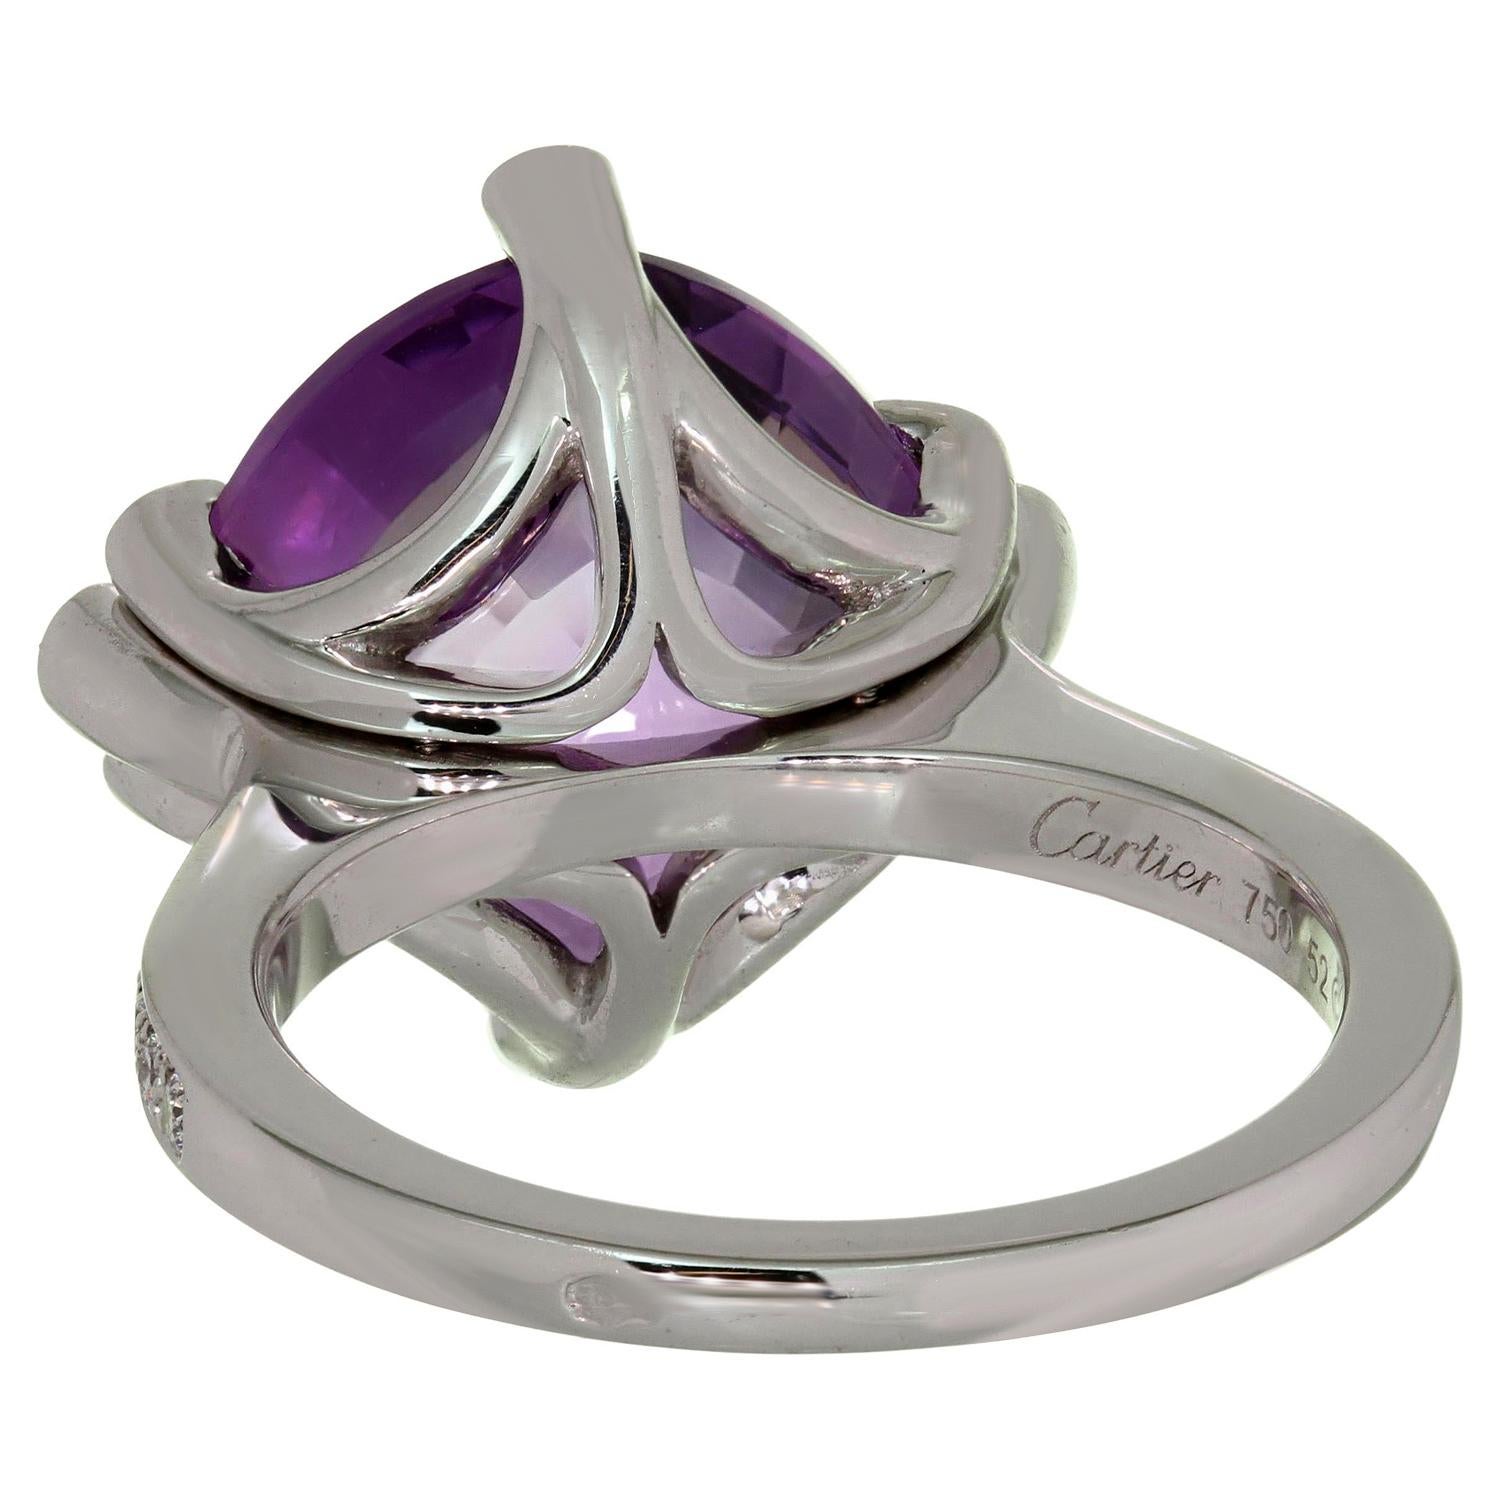 Women's CARTIER Inde Mysterieuse Amethyst Diamond 18k White Gold Ring 52 For Sale